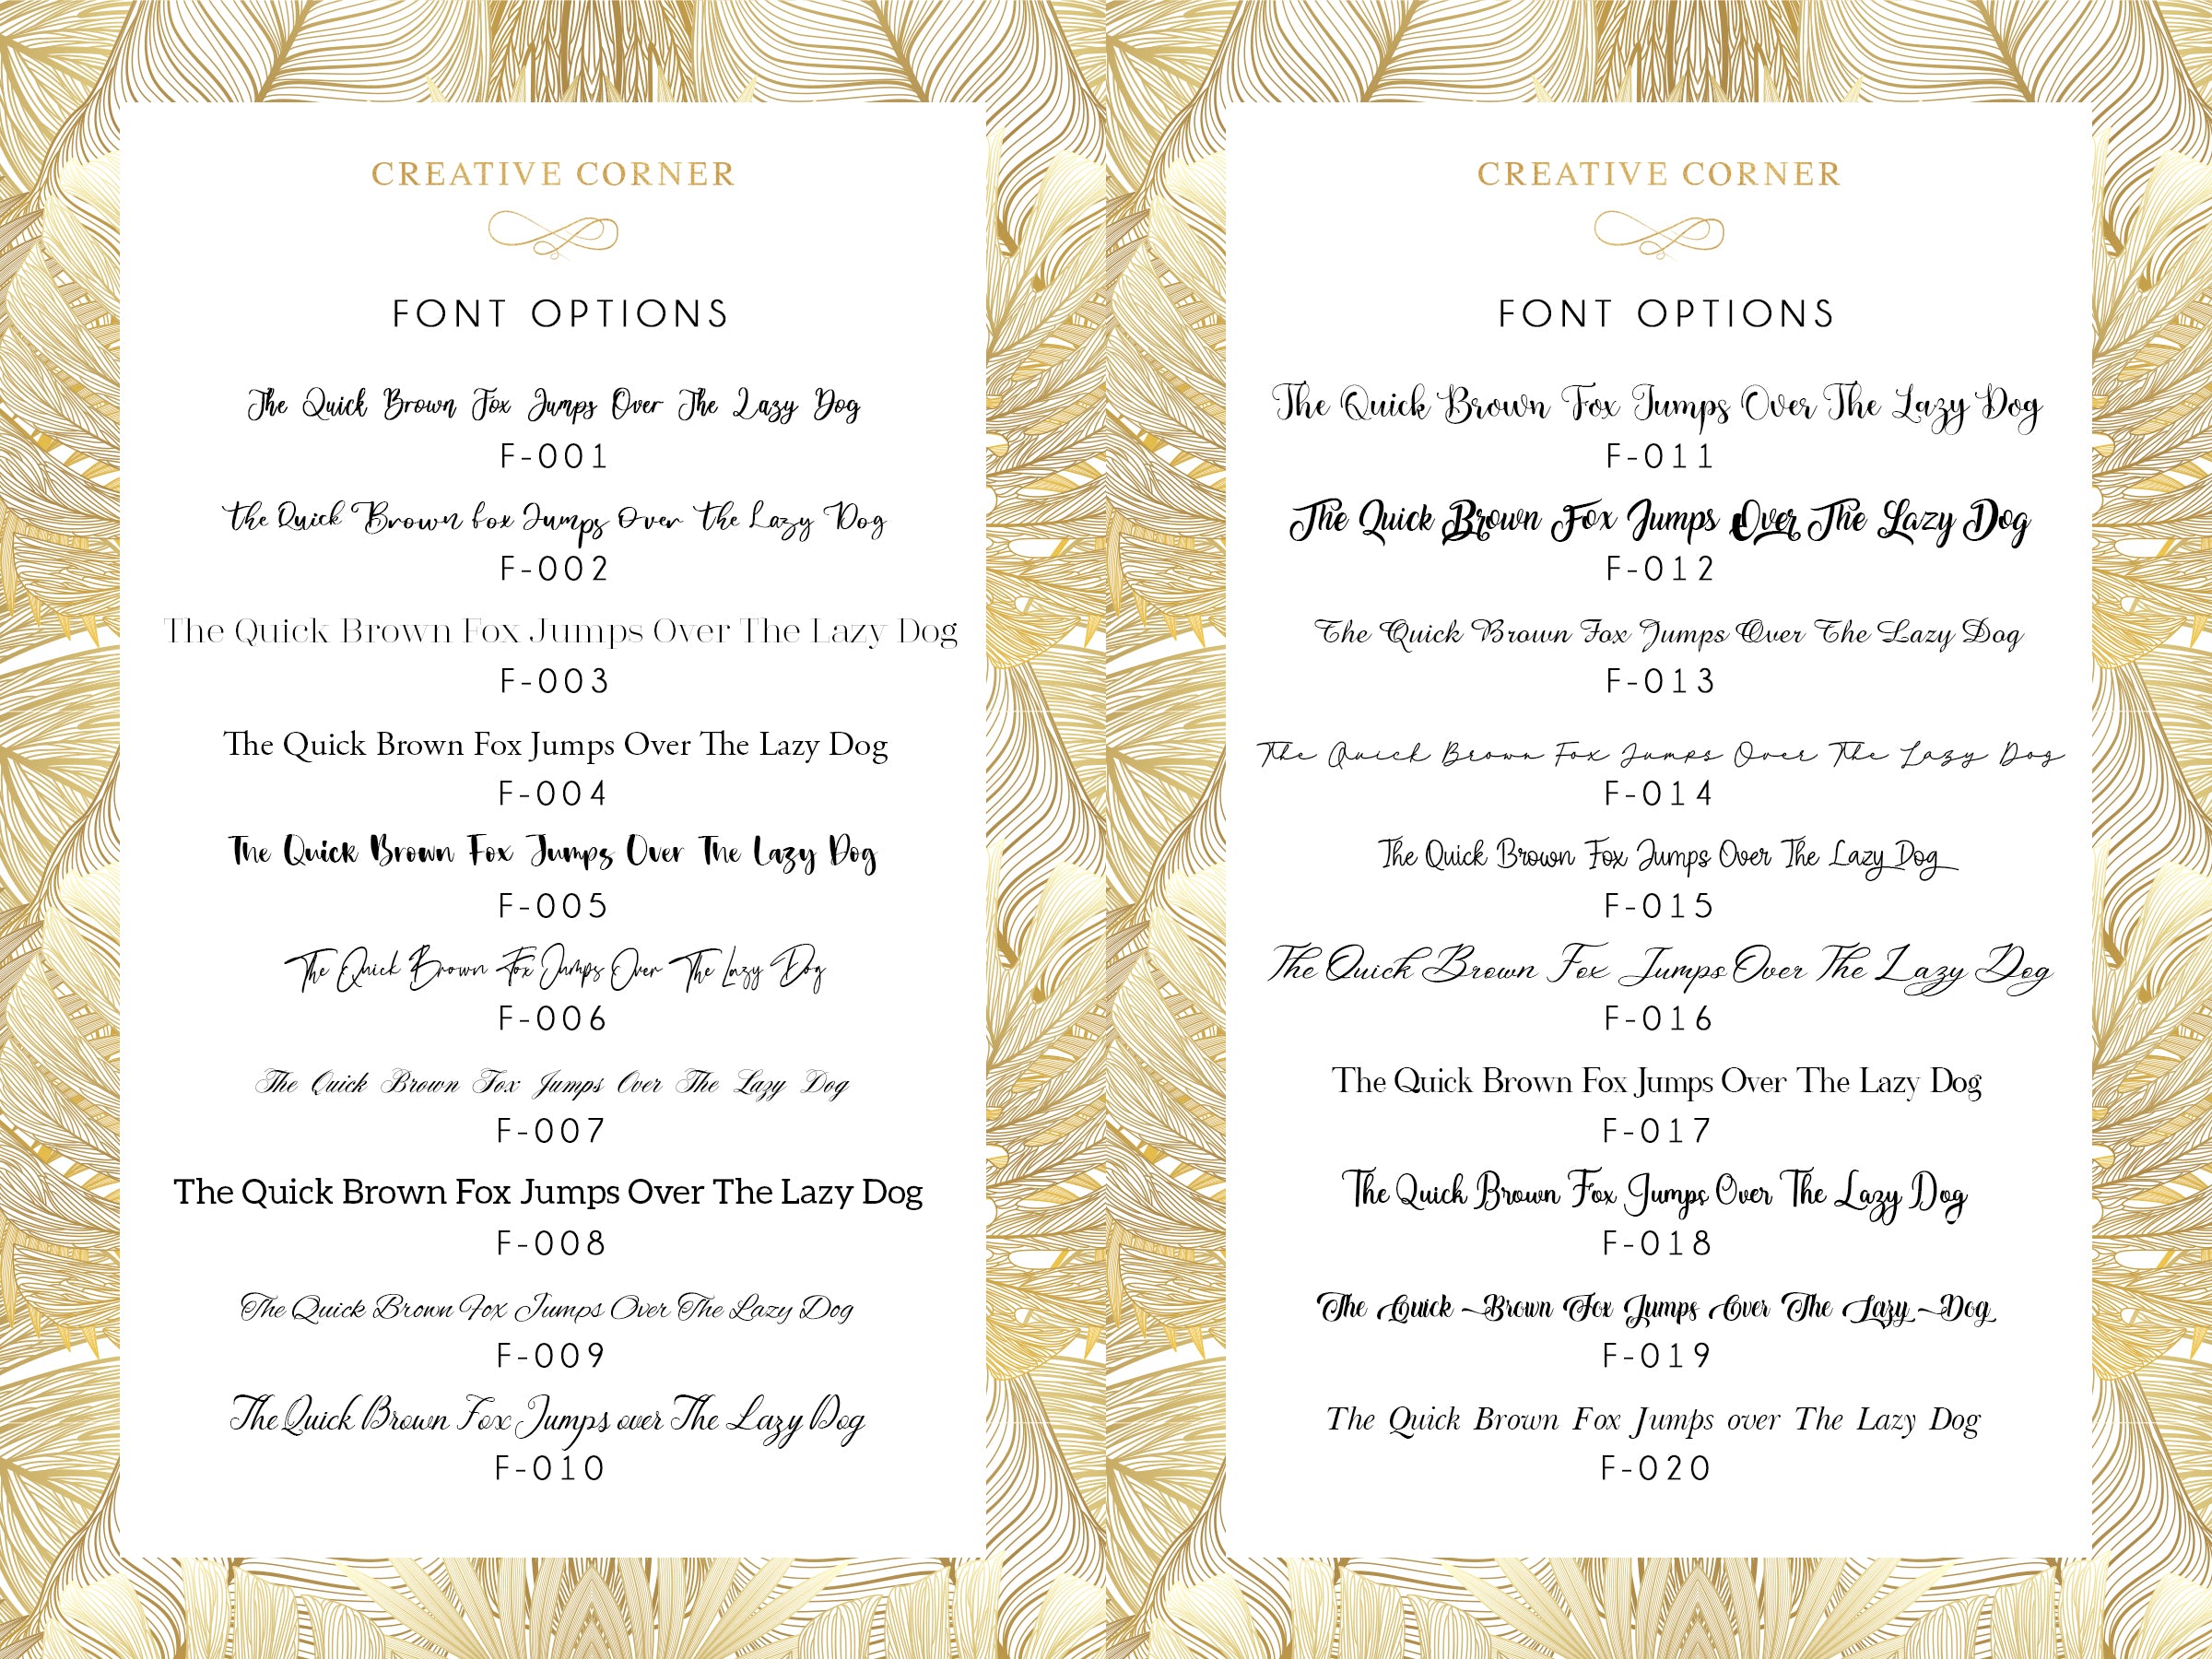 Font Options Page 1